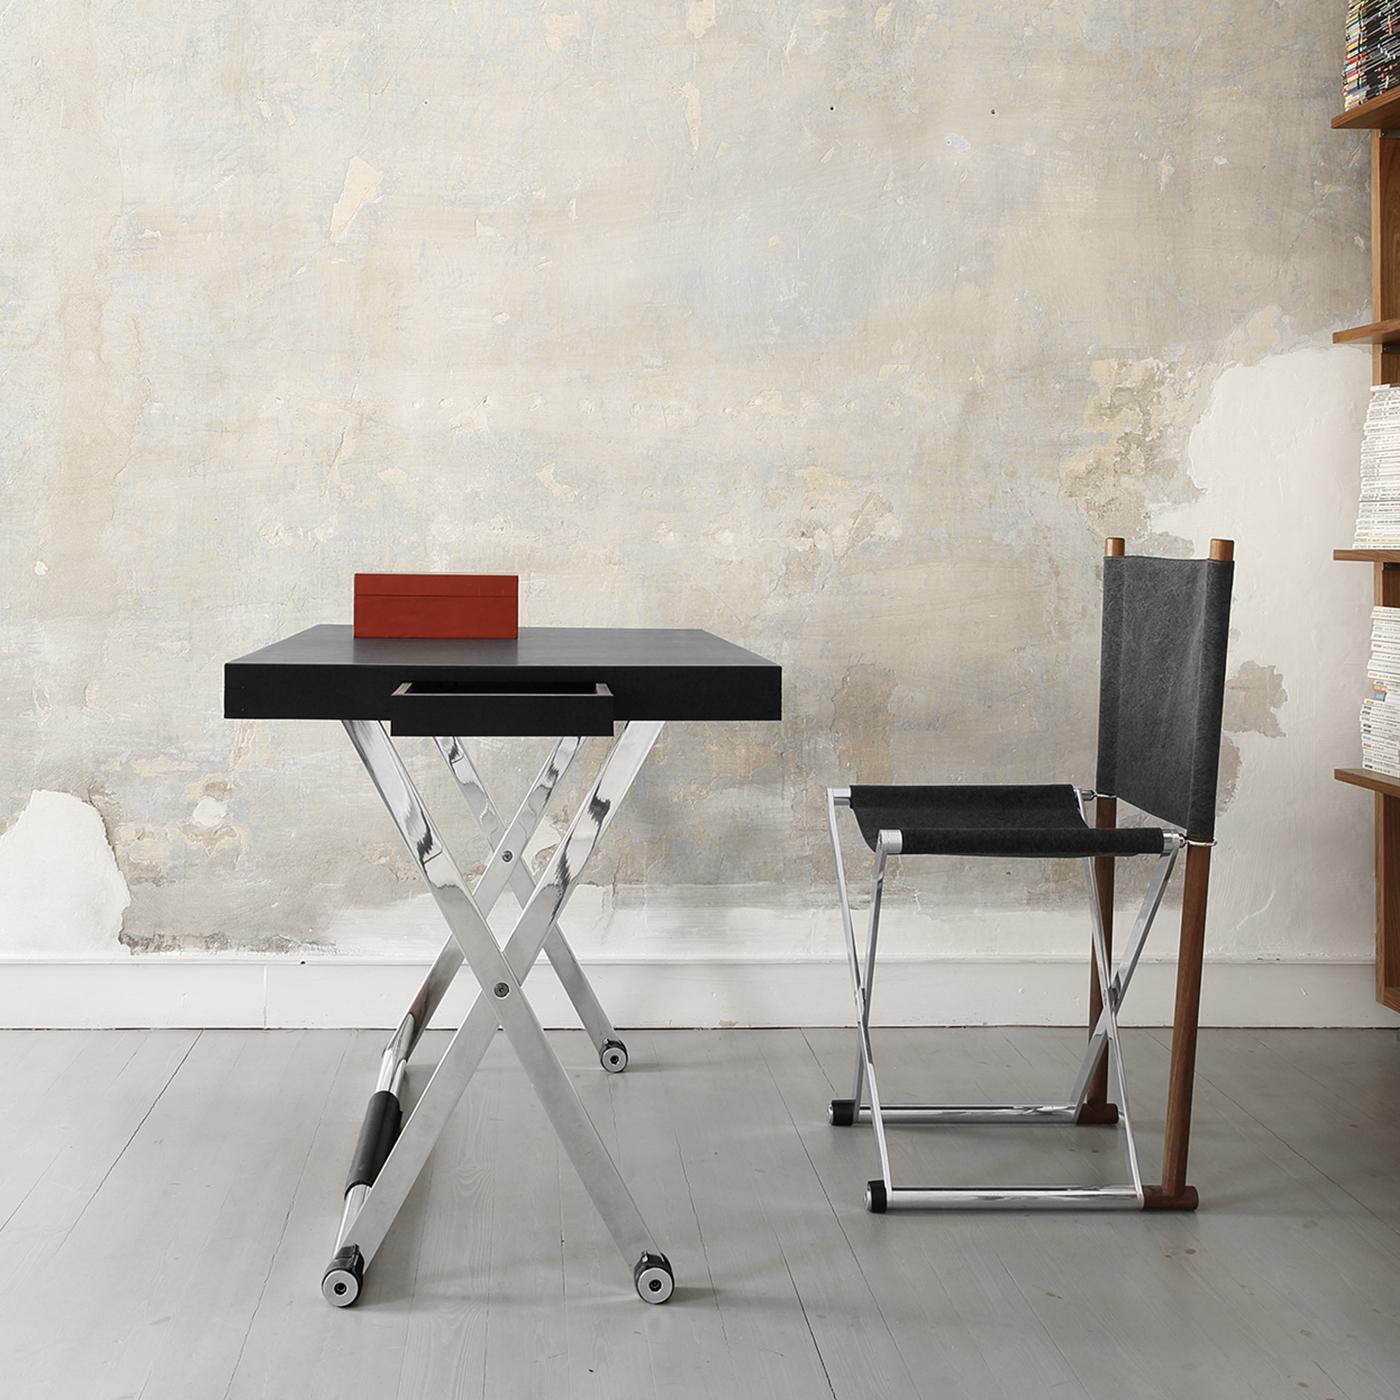 Designed with a modern interior in mind, this luxury desk is foldable and can be a precious and versatile addition to any room. The top in solid wood is covered with frosted black leather, while the four crossing legs are in aluminum, with a leather